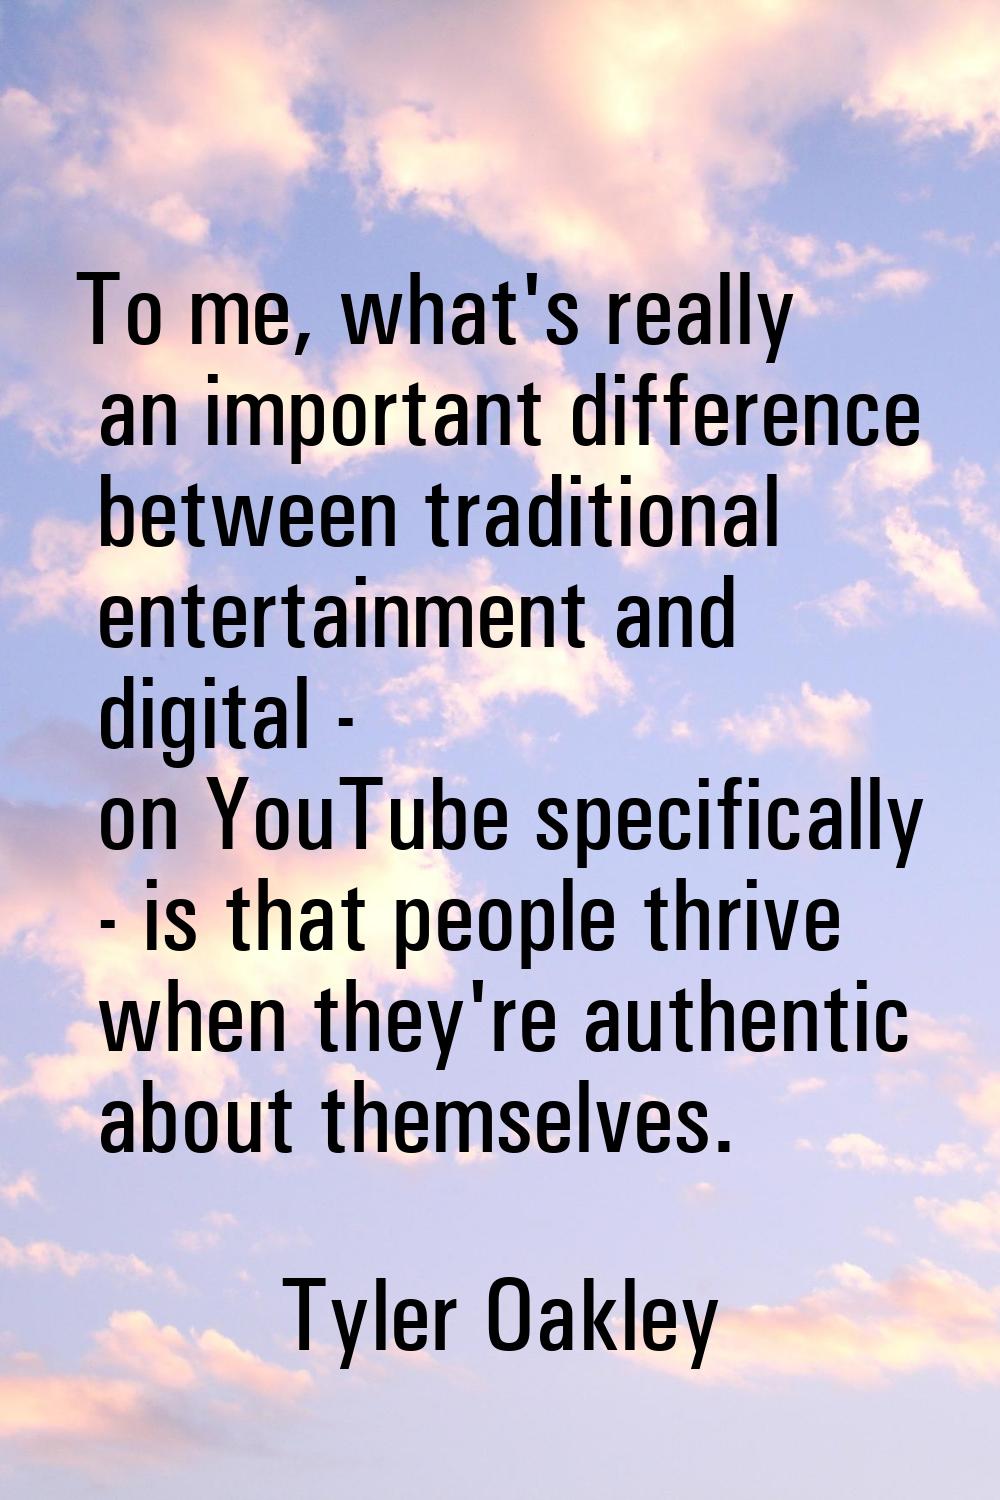 To me, what's really an important difference between traditional entertainment and digital - on You